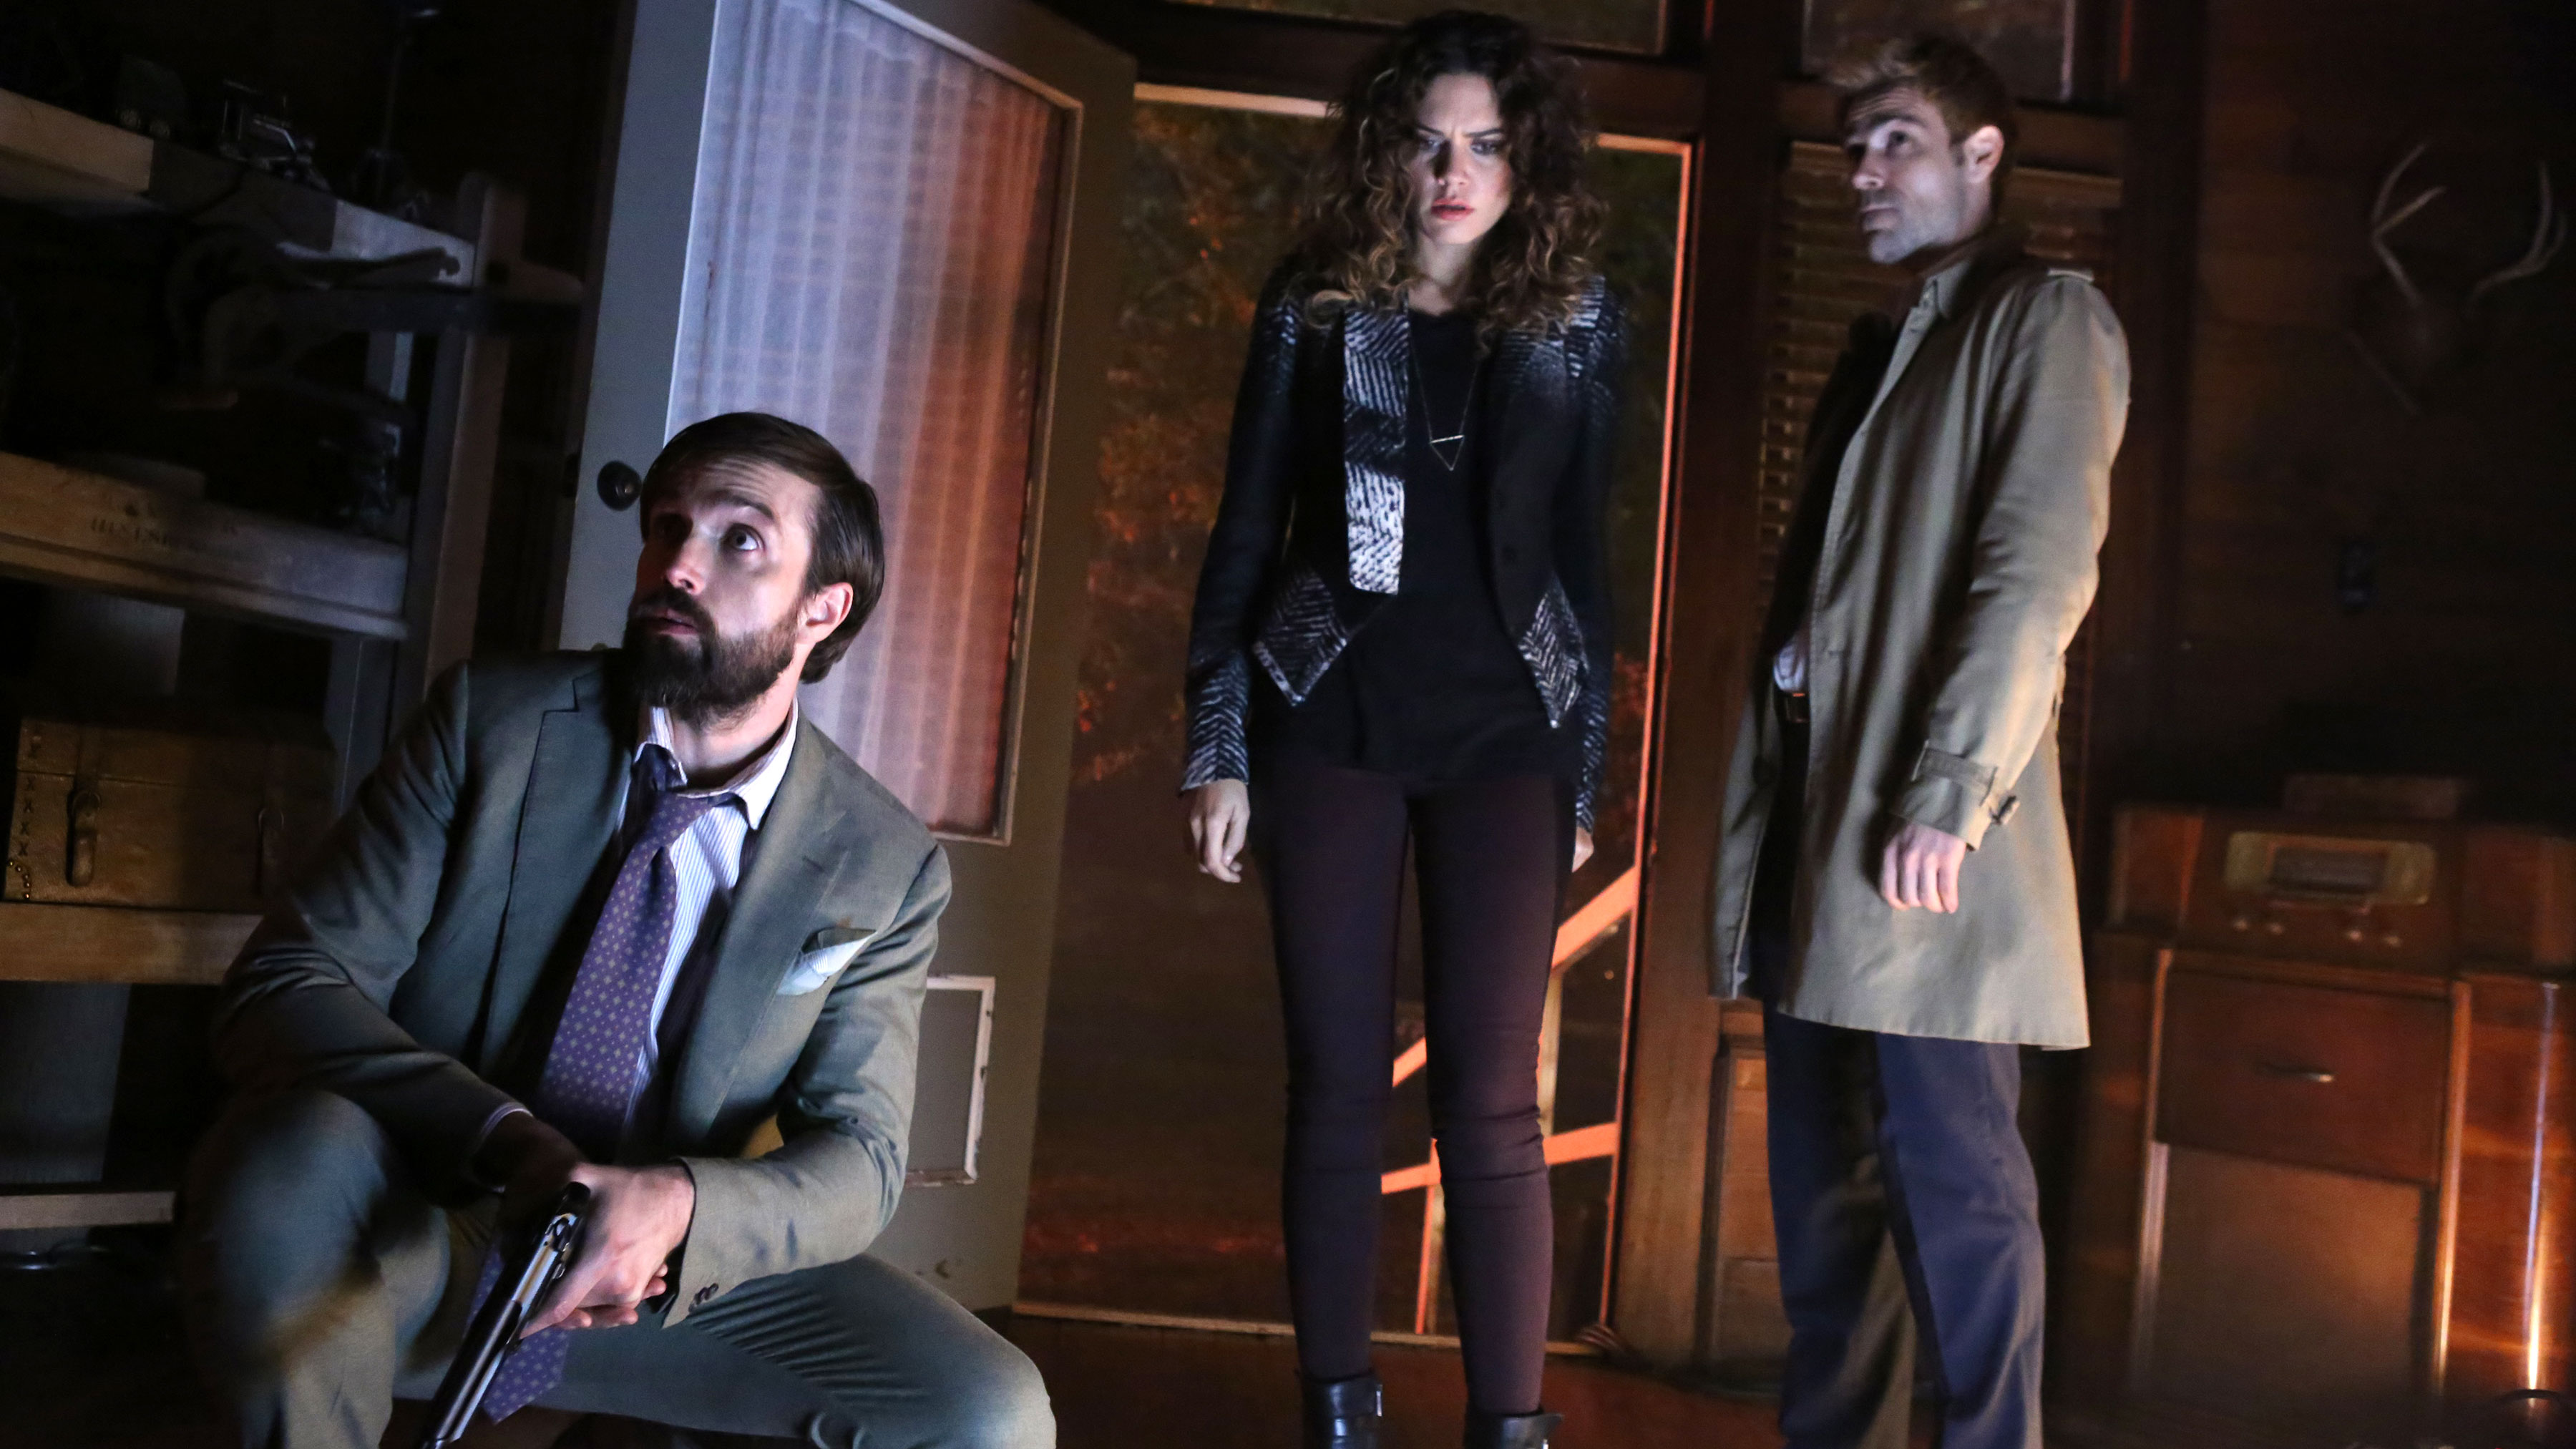 [Review] - Constantine Season 1 Finale, Episode 13, "Waiting for the Man"